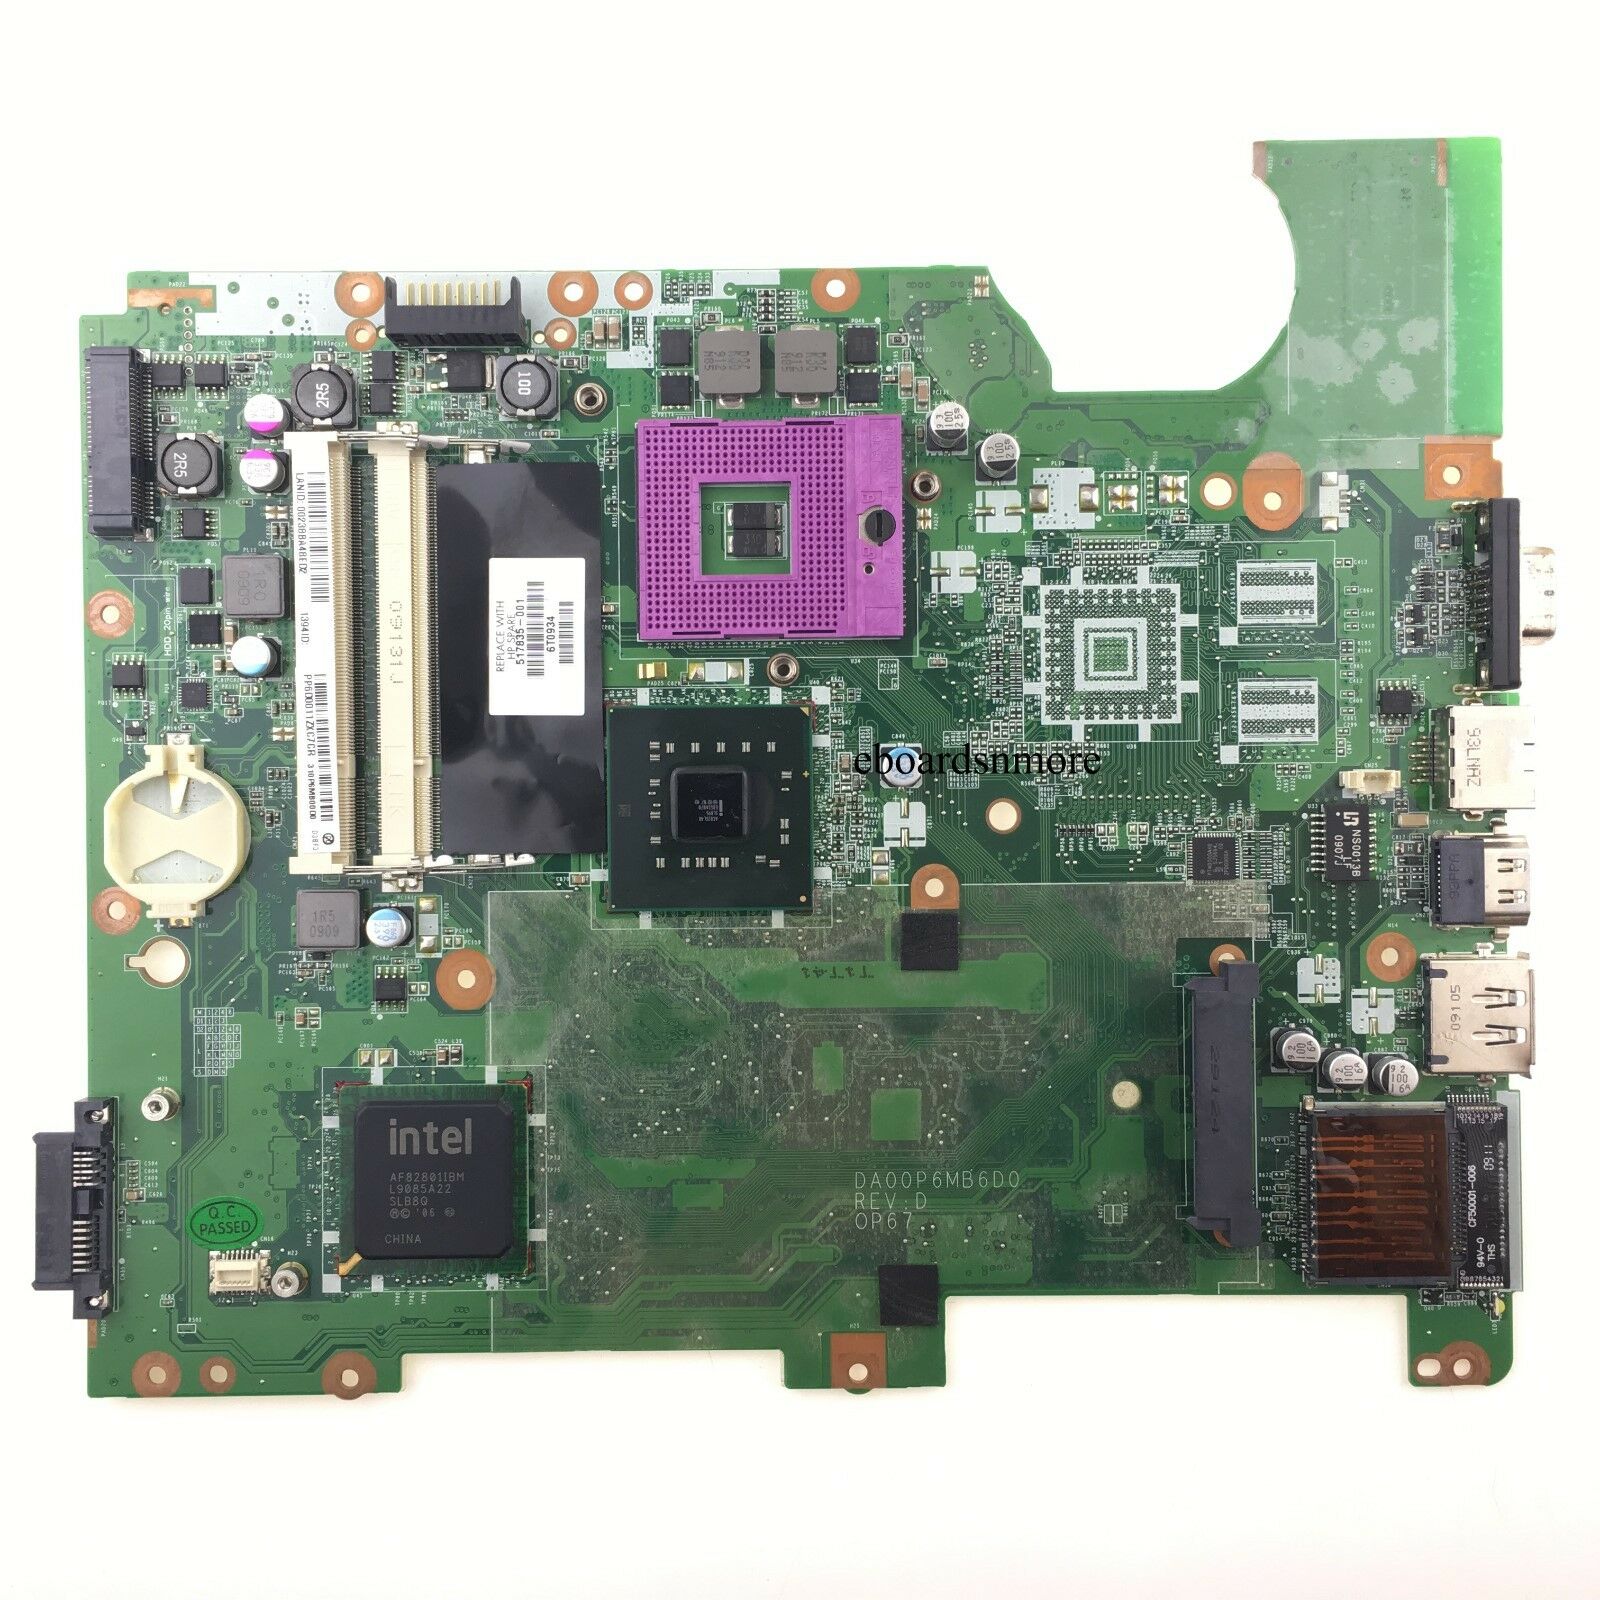 517835-001 for HP Compaq CQ61 G61 Laptop Intel Motherboard,GL40 chipset Grade A 517835-001 Intel Motherboard